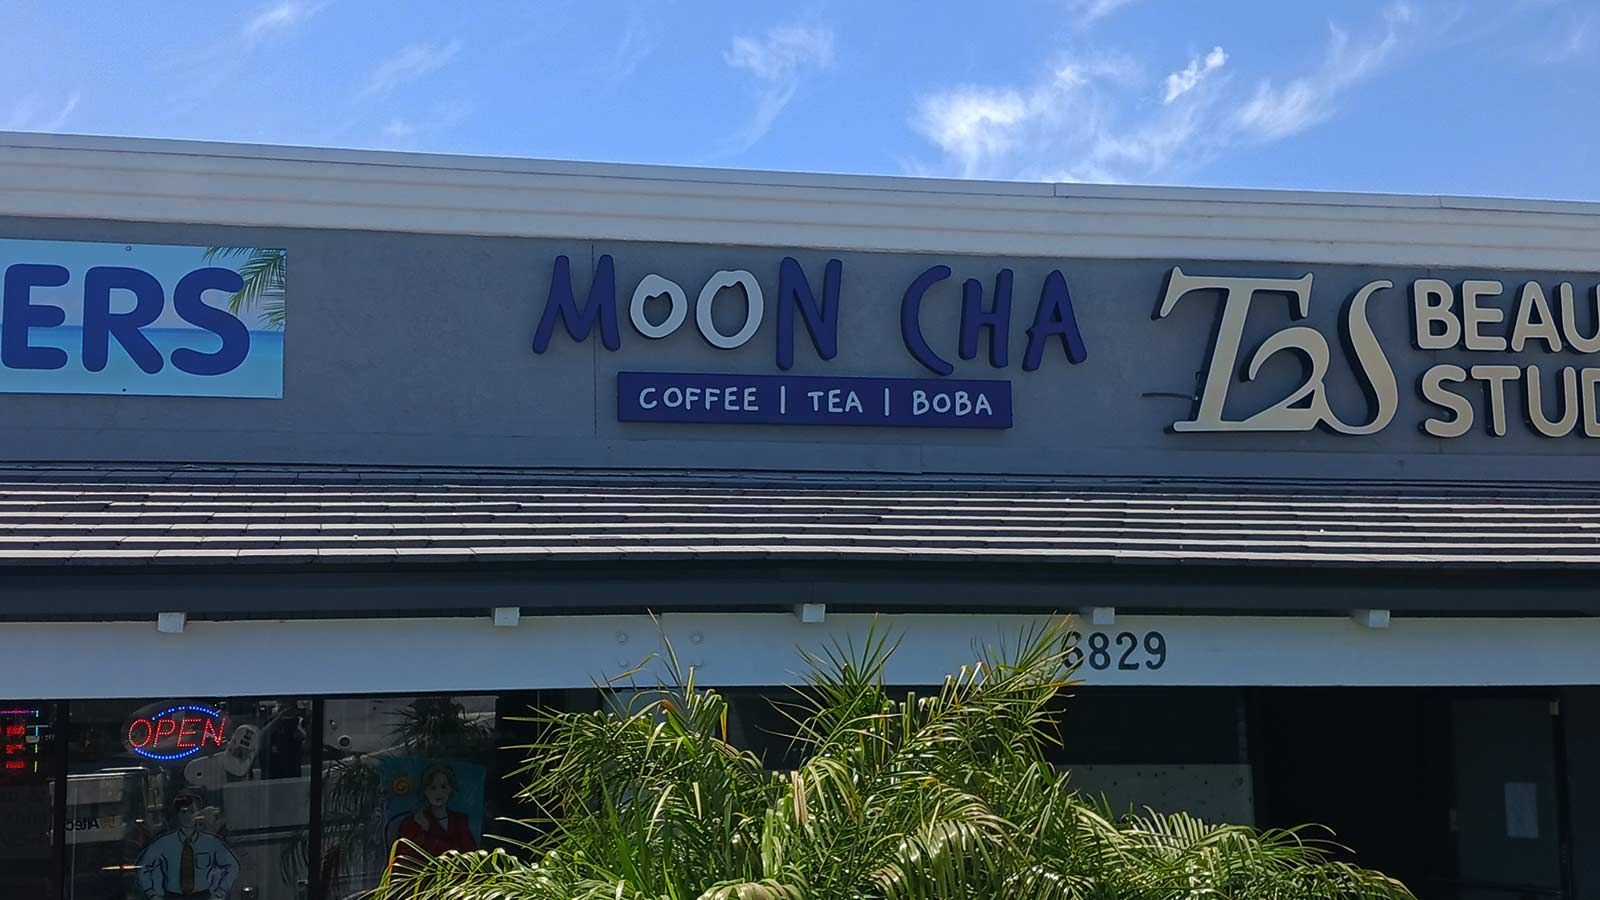 MoonCha light box sign mounted on the building top